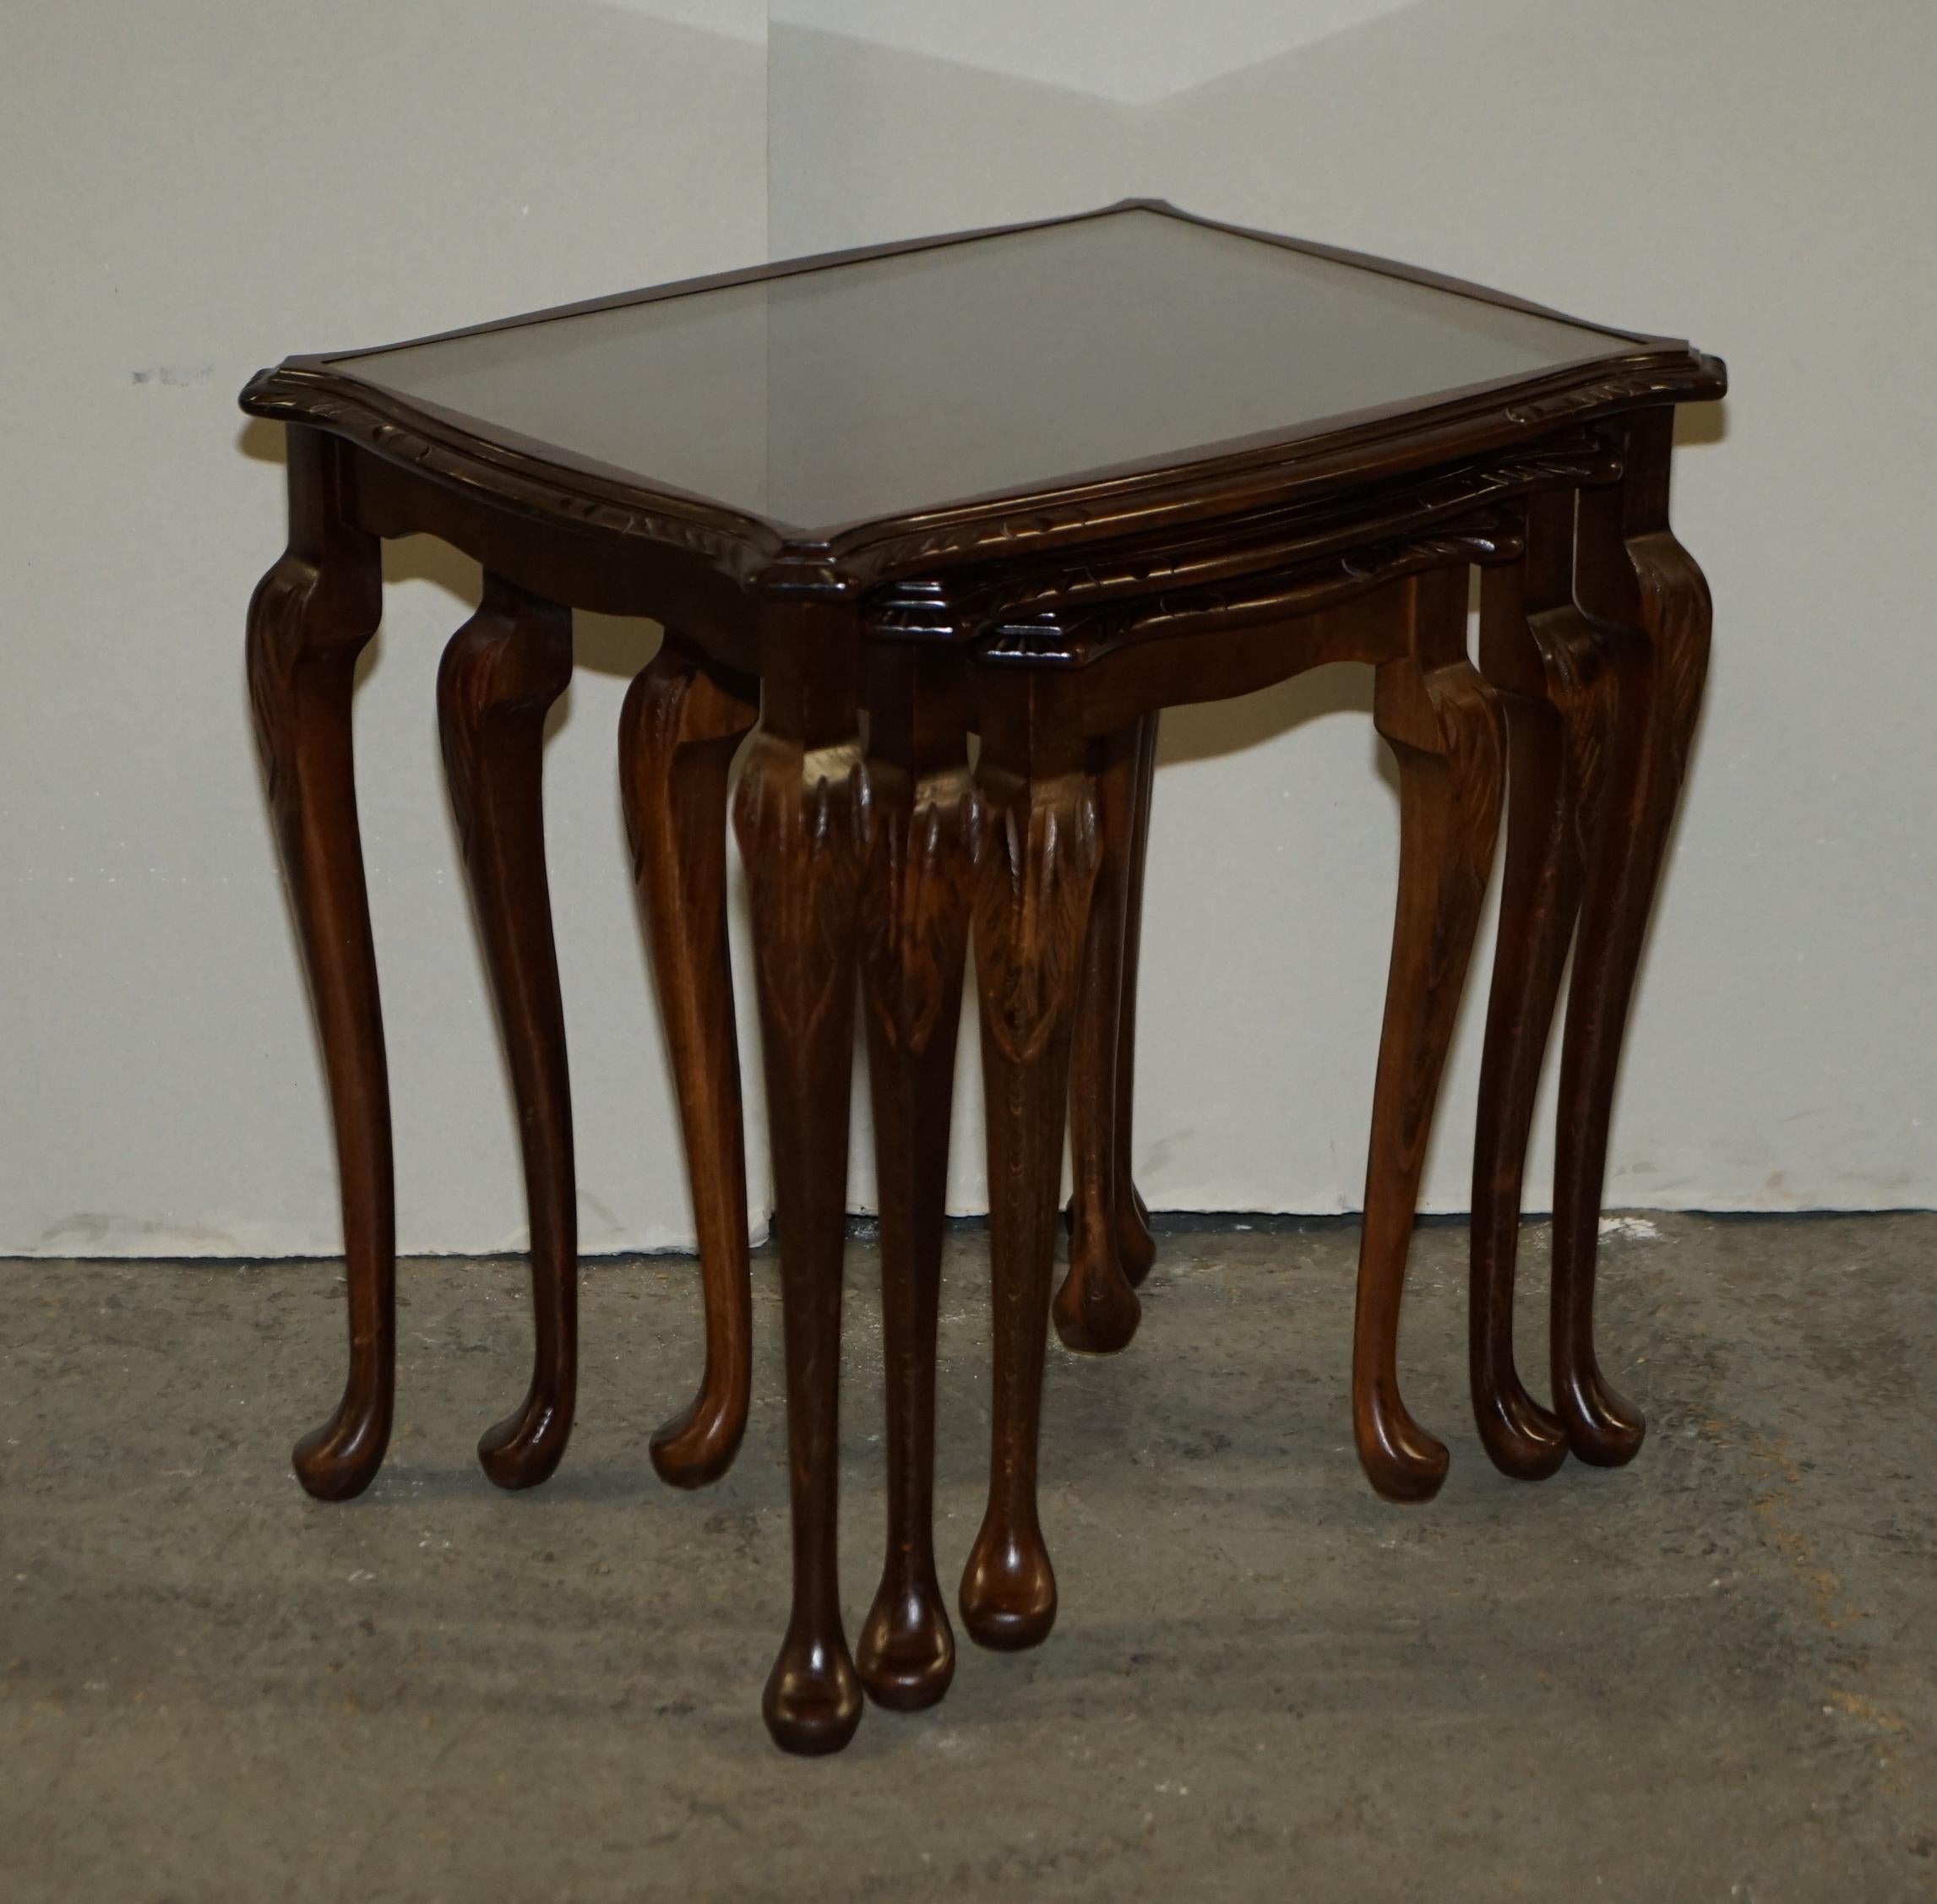 Here we have for sale a vintage nest of 3 stacking tables in solid mahogany with glass inset tops on tapered legs and carved detailing.

Overall, the tables are in good condition with a few minor signs of wear, they have been cleaned and polished